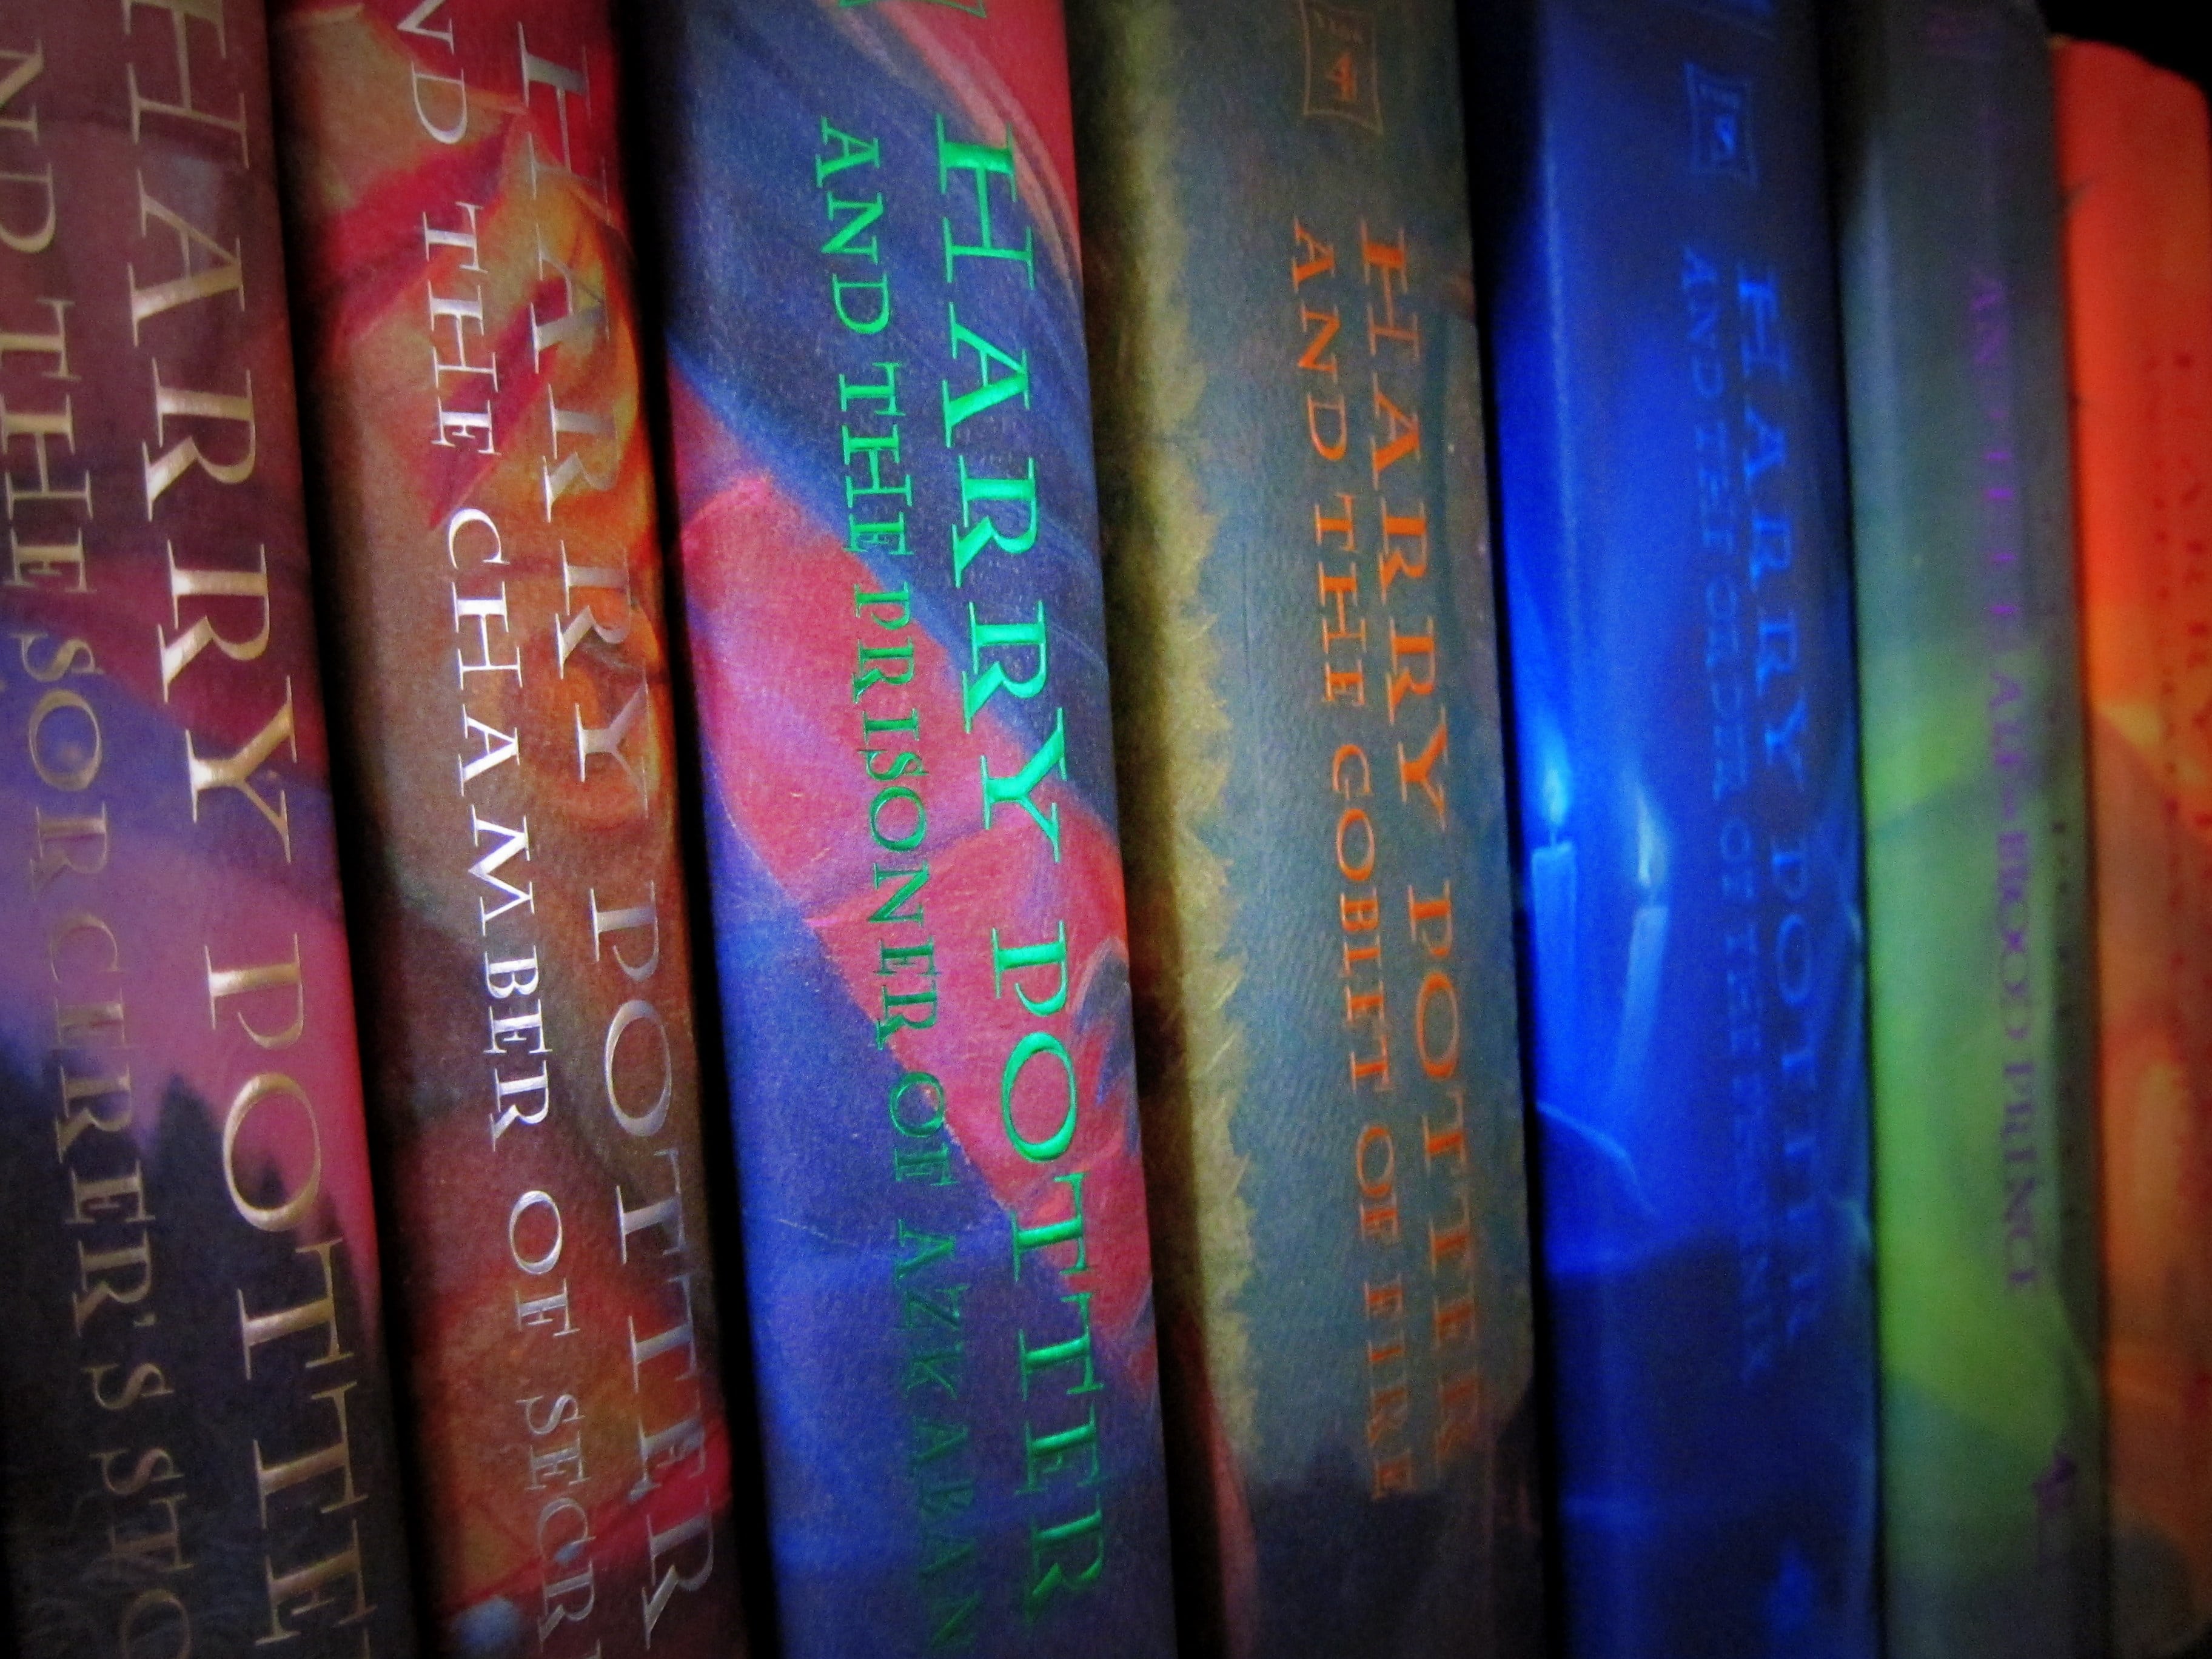 I'm an Adult Harry Potter Fan and I Need Grown-up Books